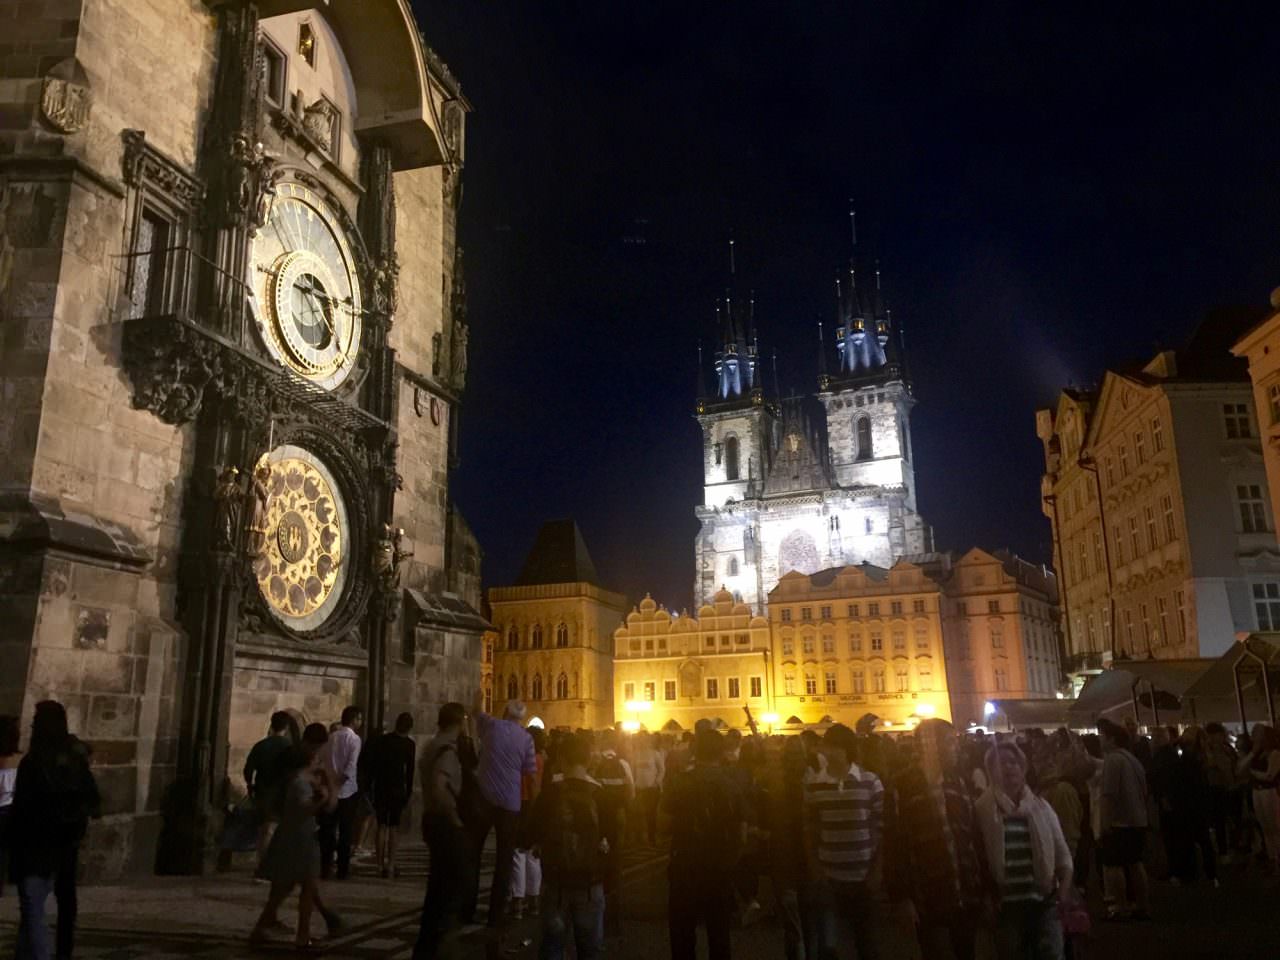 In the Old Town Square, the Prague astronomical clock is a medieval astronomical clock dating from 1410, making it the third-oldest astronomical clock in the world and the oldest one still operating. © 2016 Ralph Grizzle